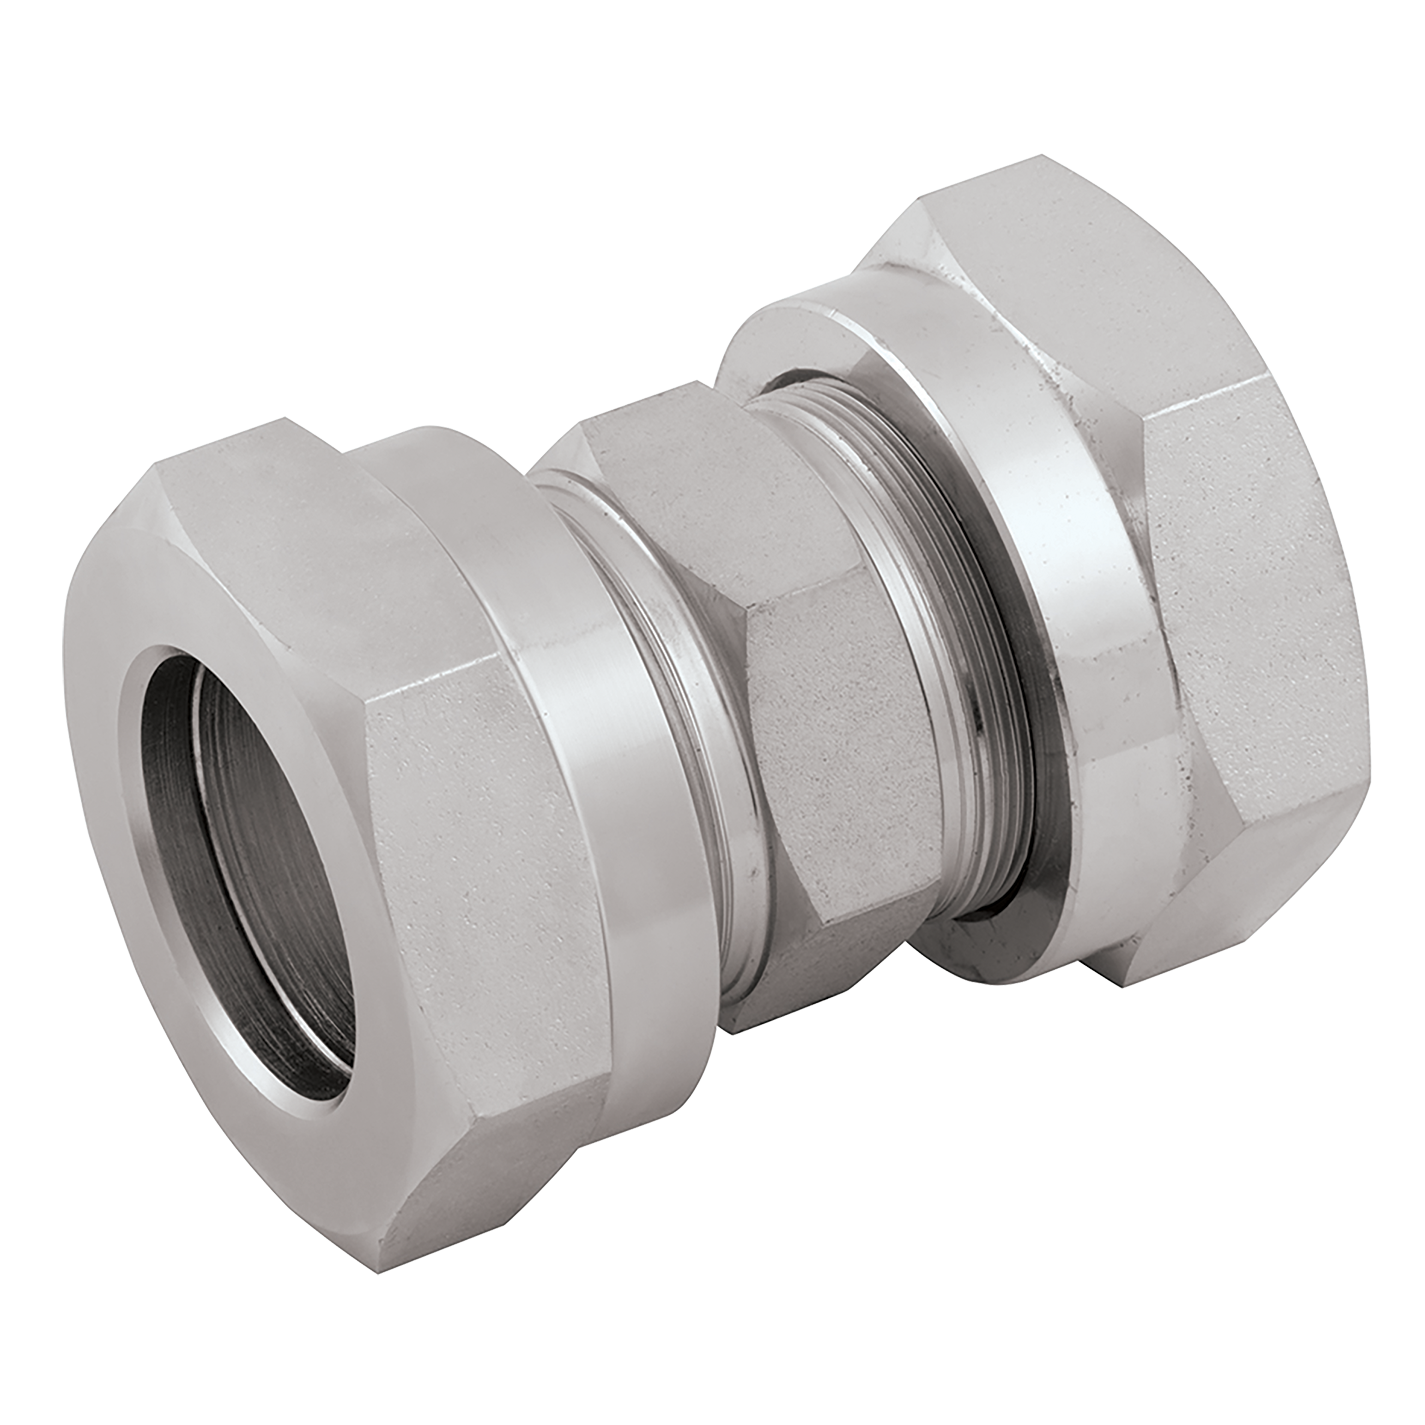 3/8" NB EQUAL STRAIGHTAIGHT COUPLING